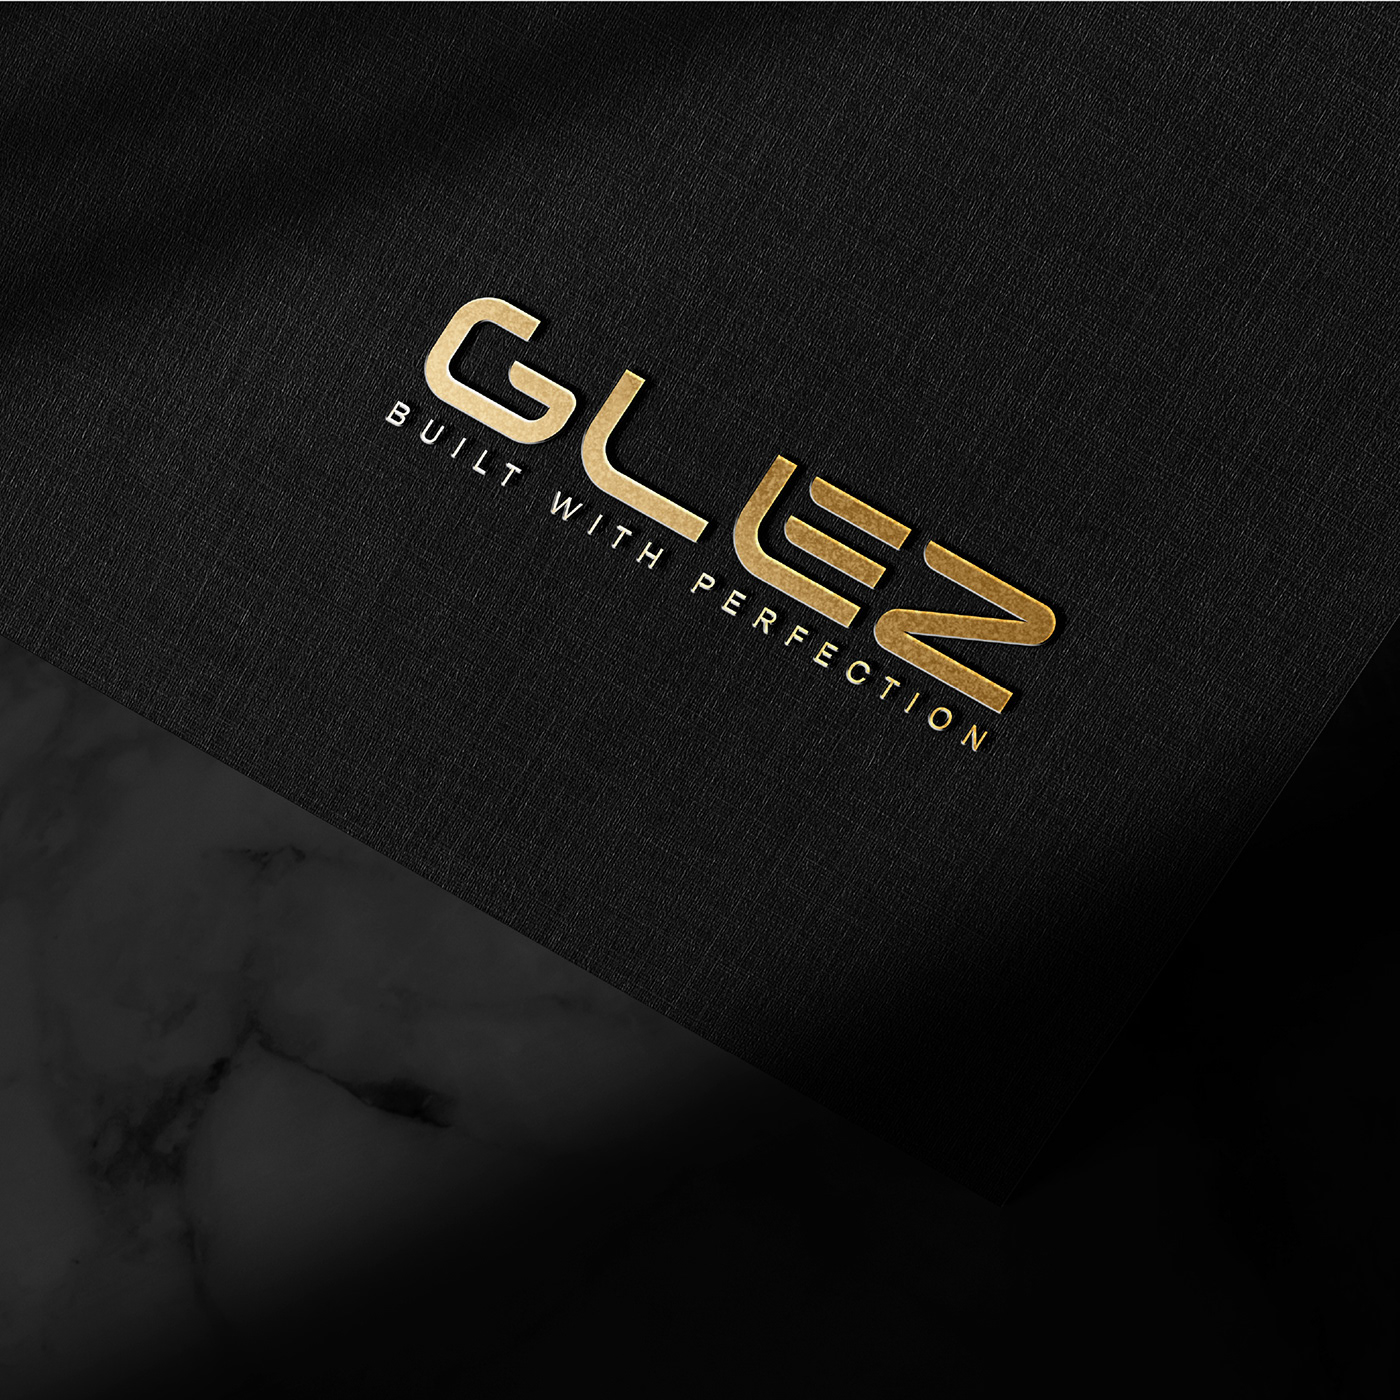 Have a look at the branding and mockups created for Glez Interiors.